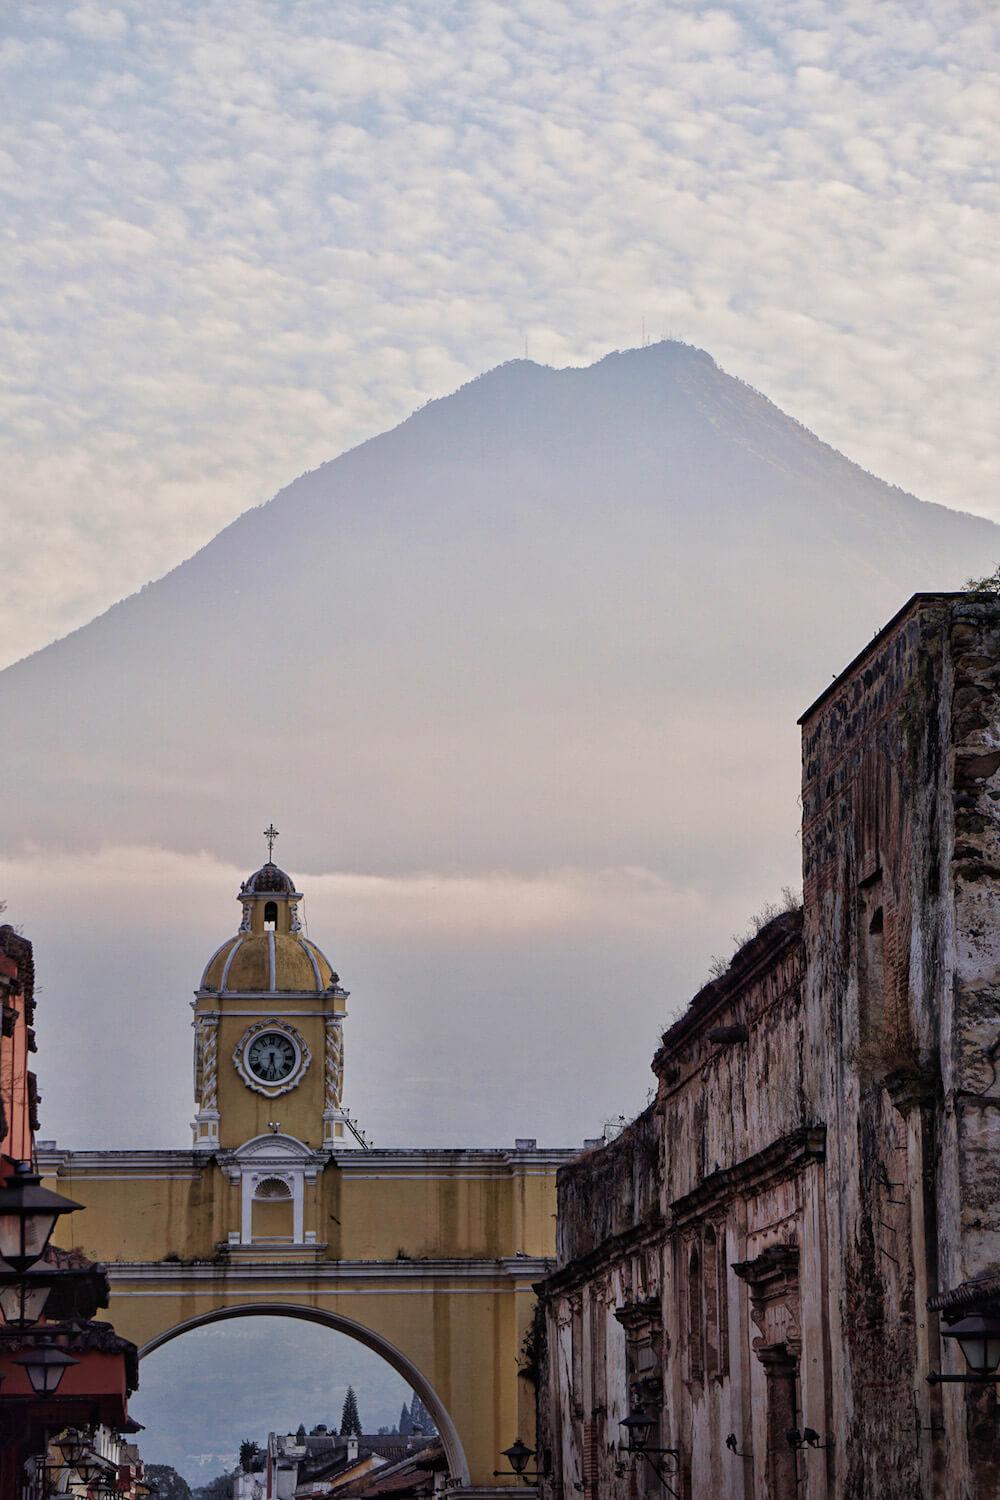 Antigua Guatemala- the yellow archway and clock tower span the street with the volcano in the background